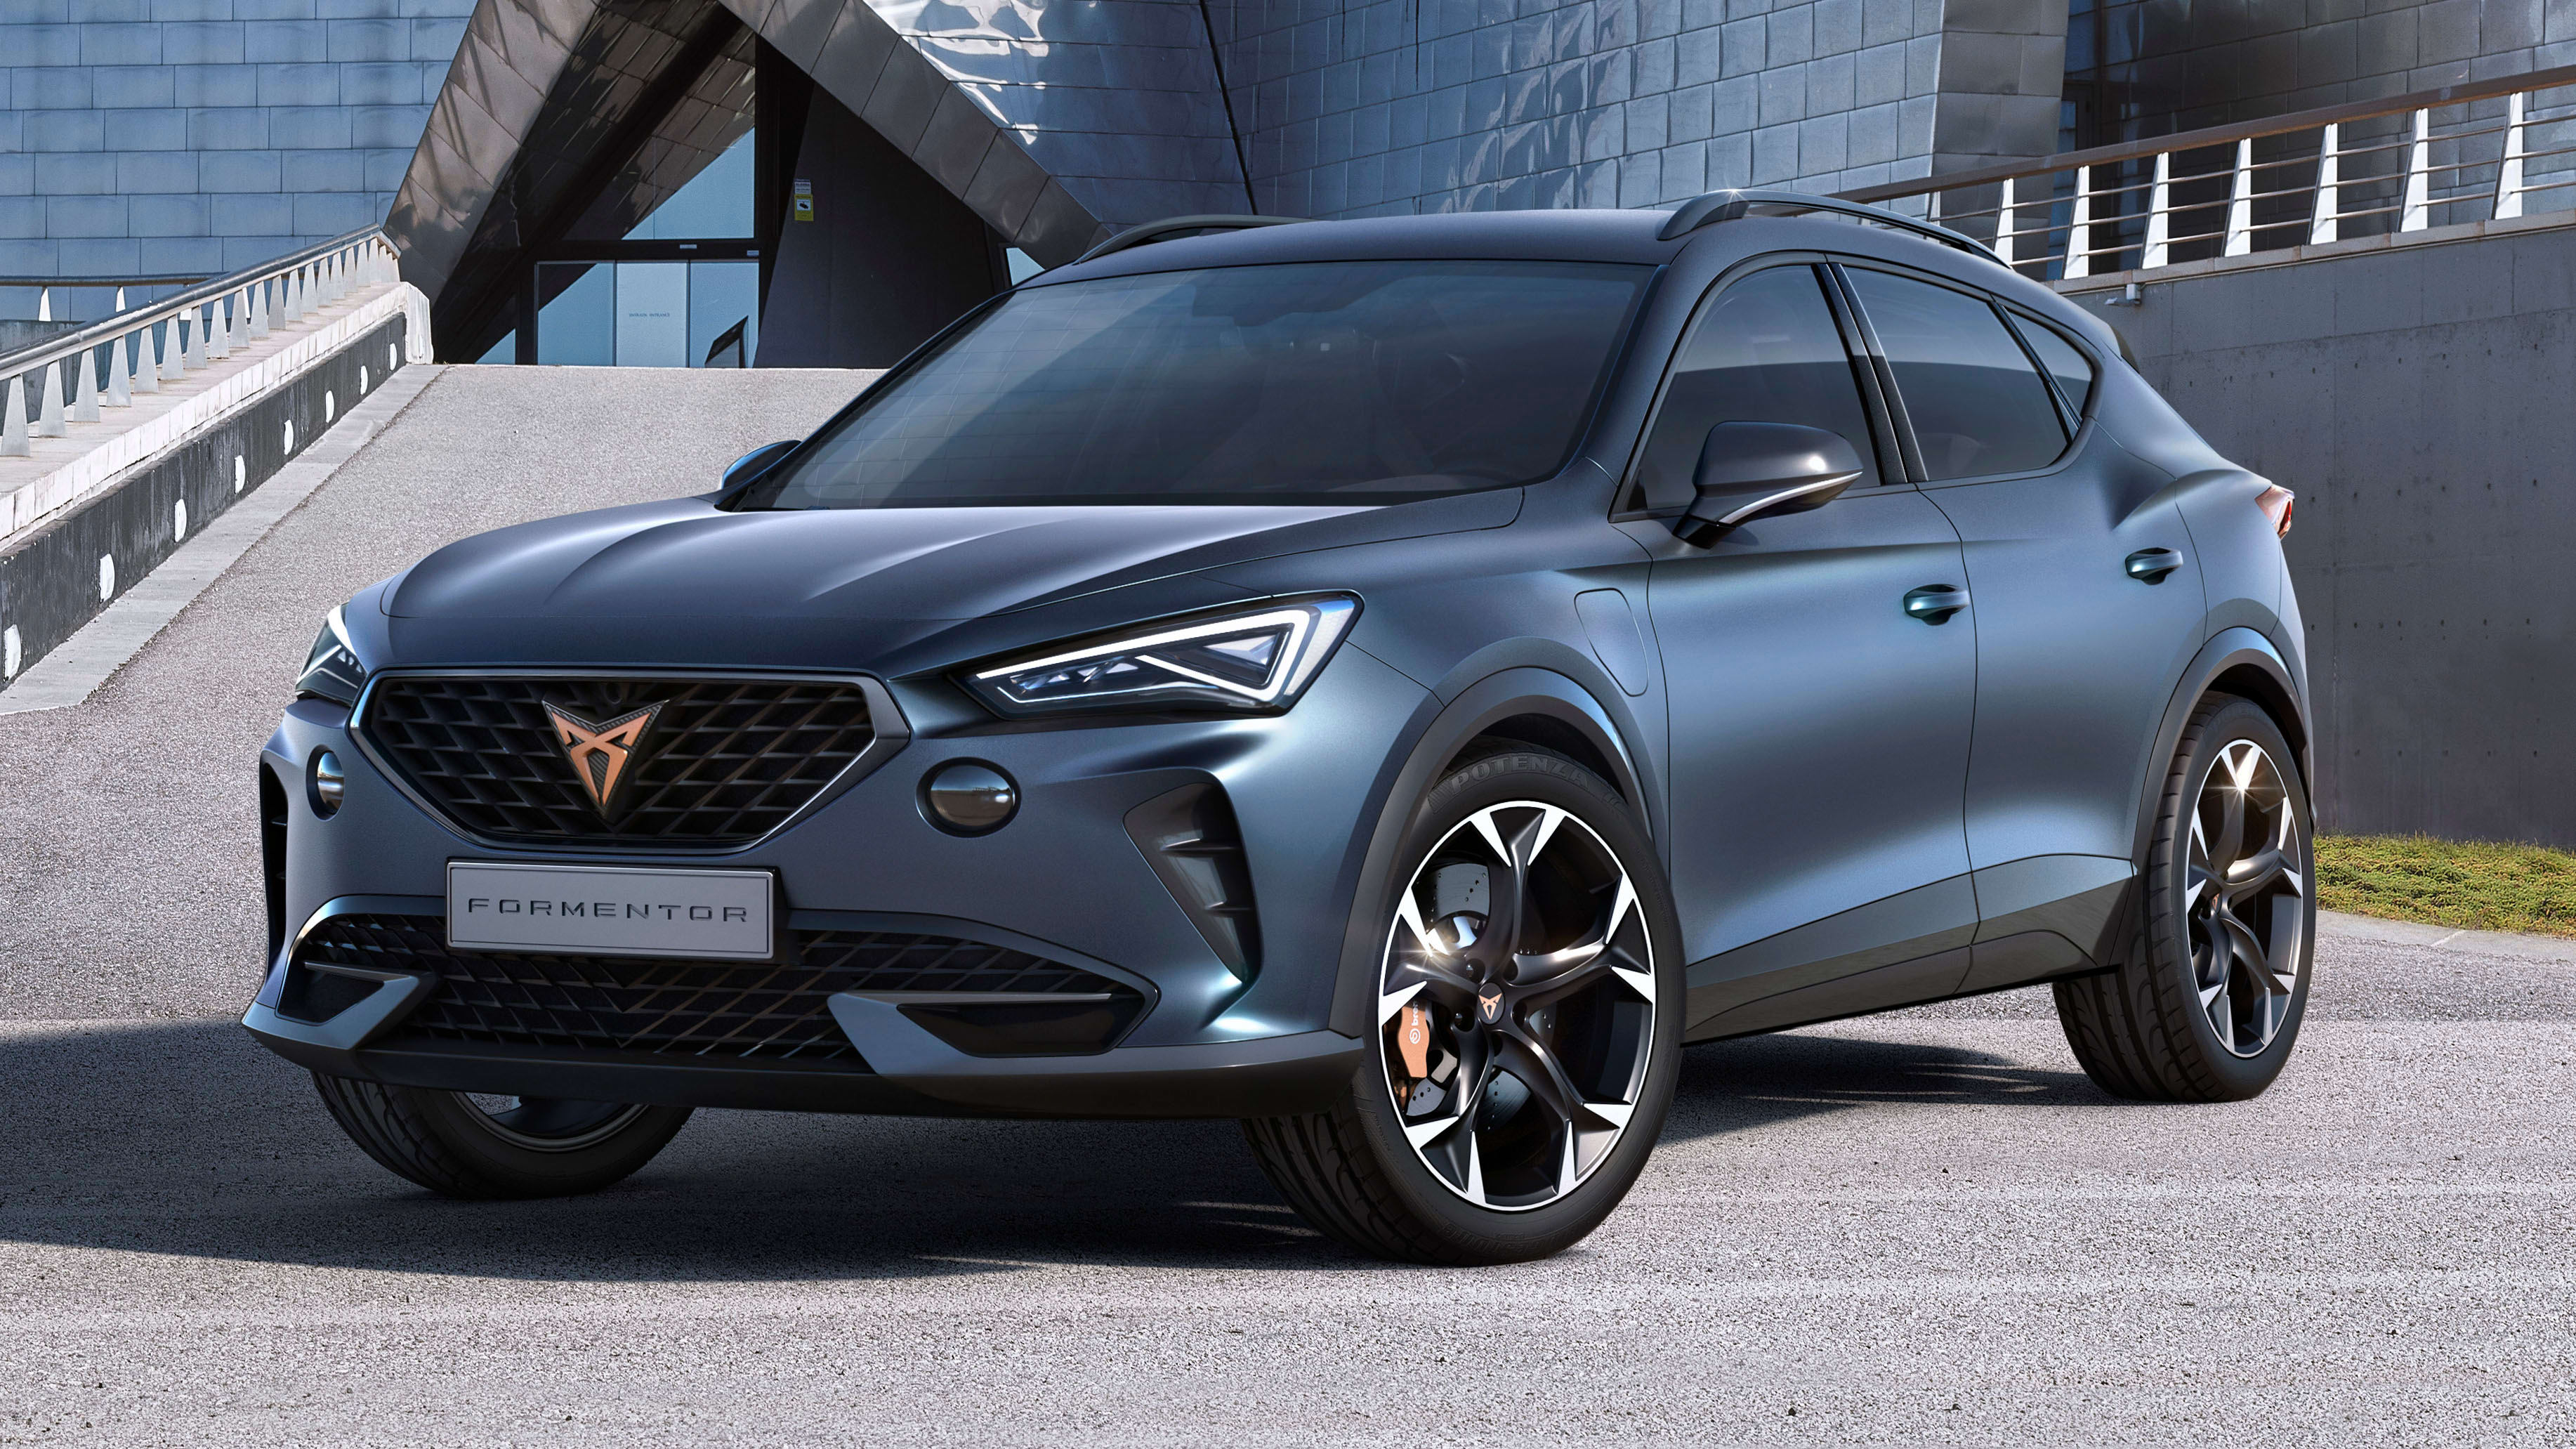 Cupra Formentor concept unveiled - Drive